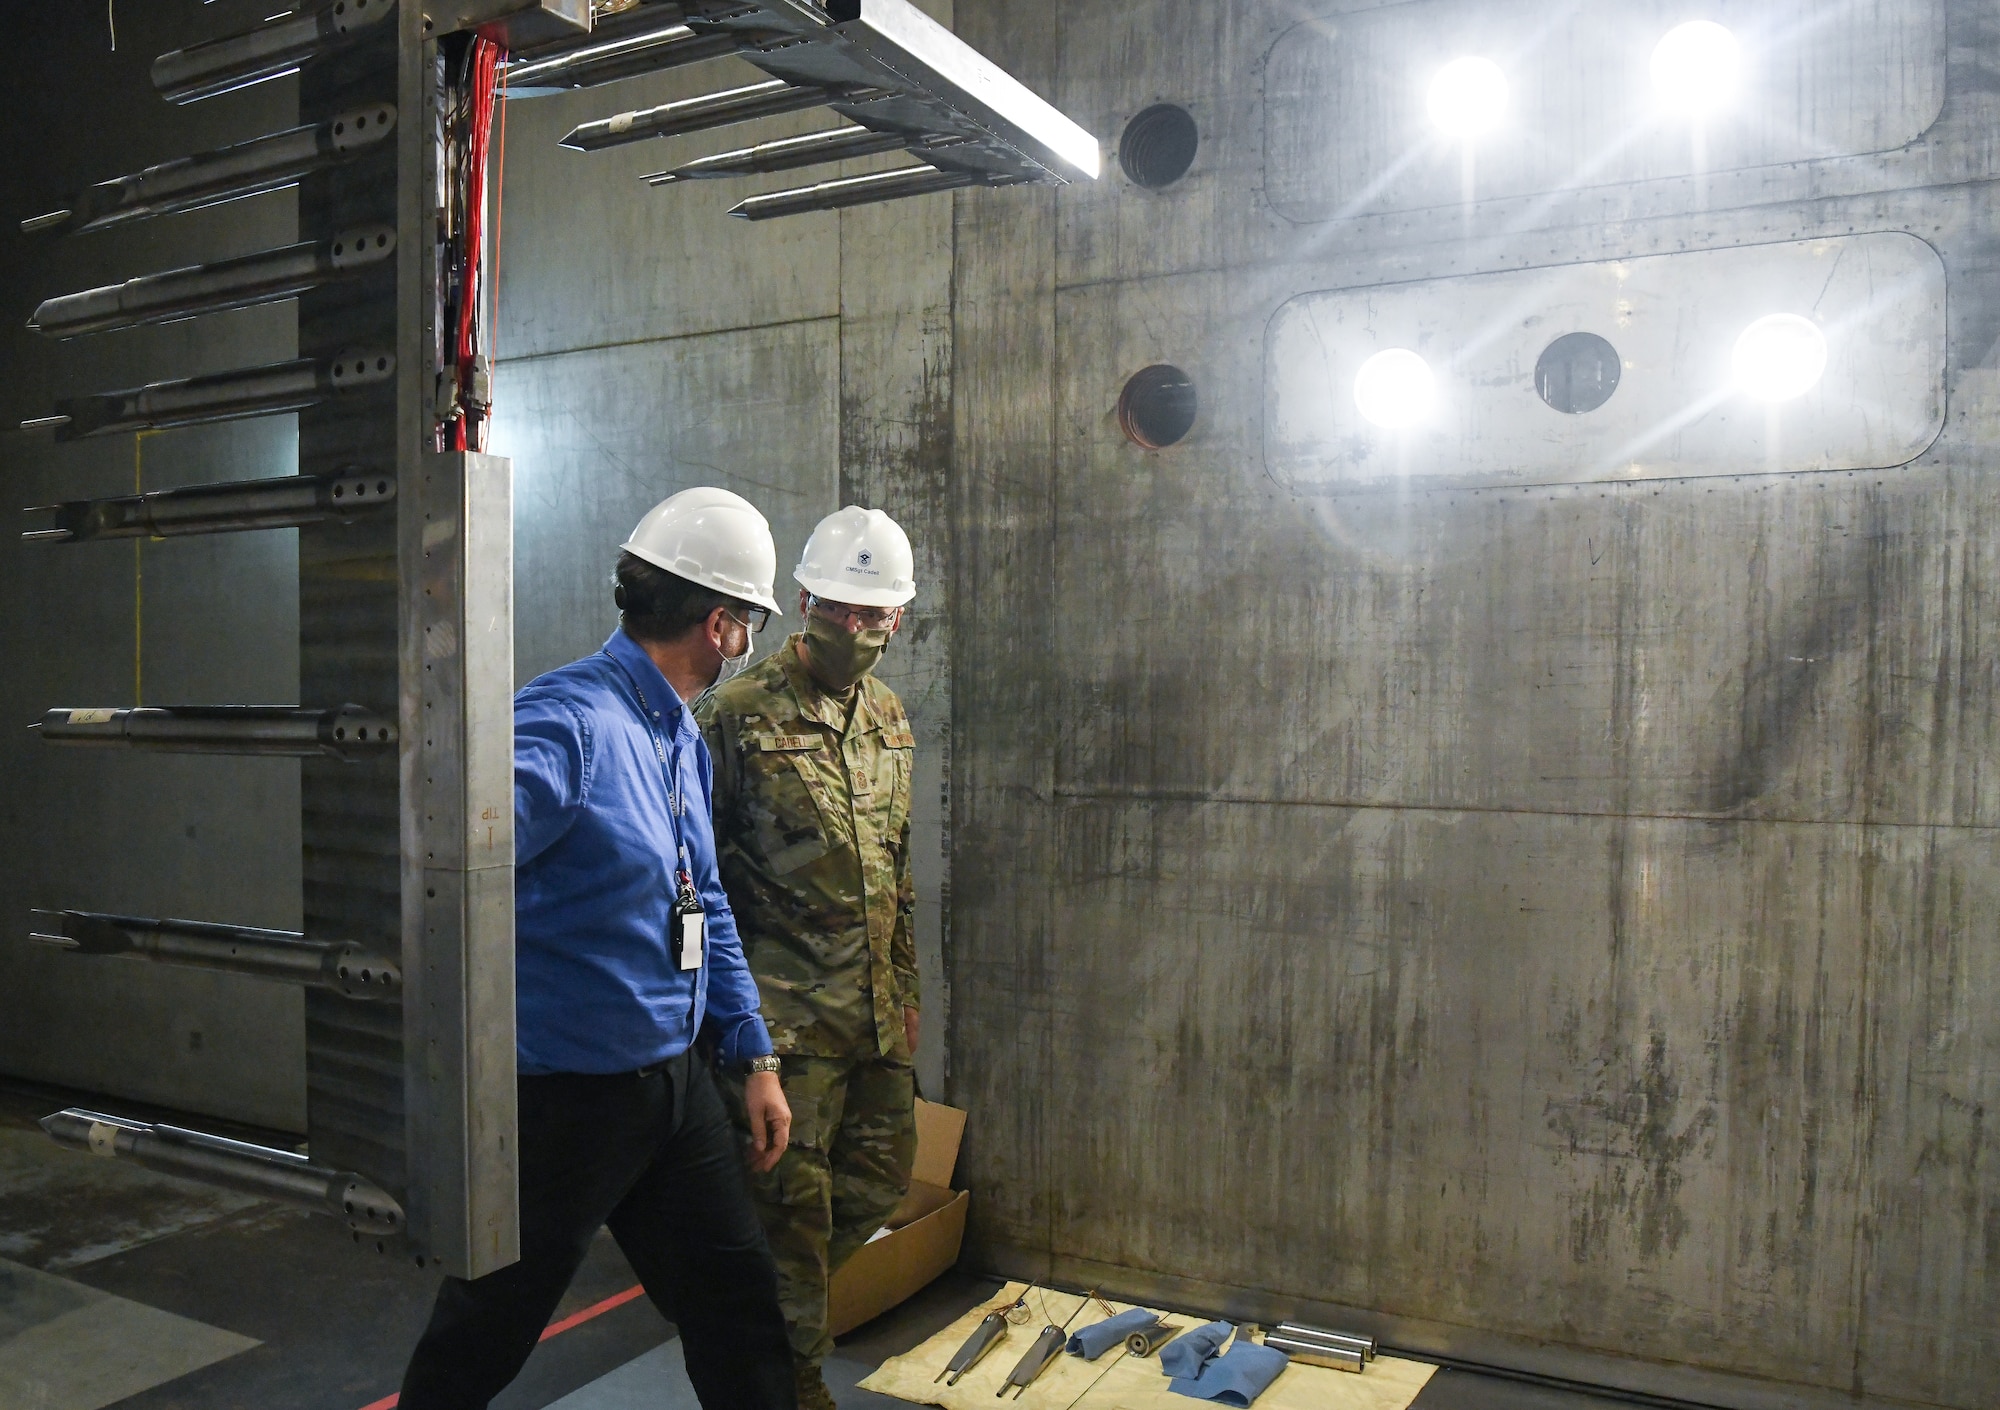 Scott Meredith, left, technical advisor for Arnold Engineering Development Complex (AEDC) Flight Systems Branch, and Chief Master Sgt. Stanley Cadell, command chief, Air Force Materiel Command, walk past a rake installed in a test section of the 16-foot supersonic wind tunnel, which is used to characterize the flow in the tunnel, during a tour July 8, 2020, at Arnold Air Force Base, Tenn., headquarters of AEDC. The visit to the Base by Cadell and Gen. Arnold W. Bunch Jr., commander, Air Force Materiel Command, focused on COVID-19 response, and diversity and inclusion. (U.S. Air Force photo by Jill Pickett) (This image has been altered by obscuring a badge for security purposes.)